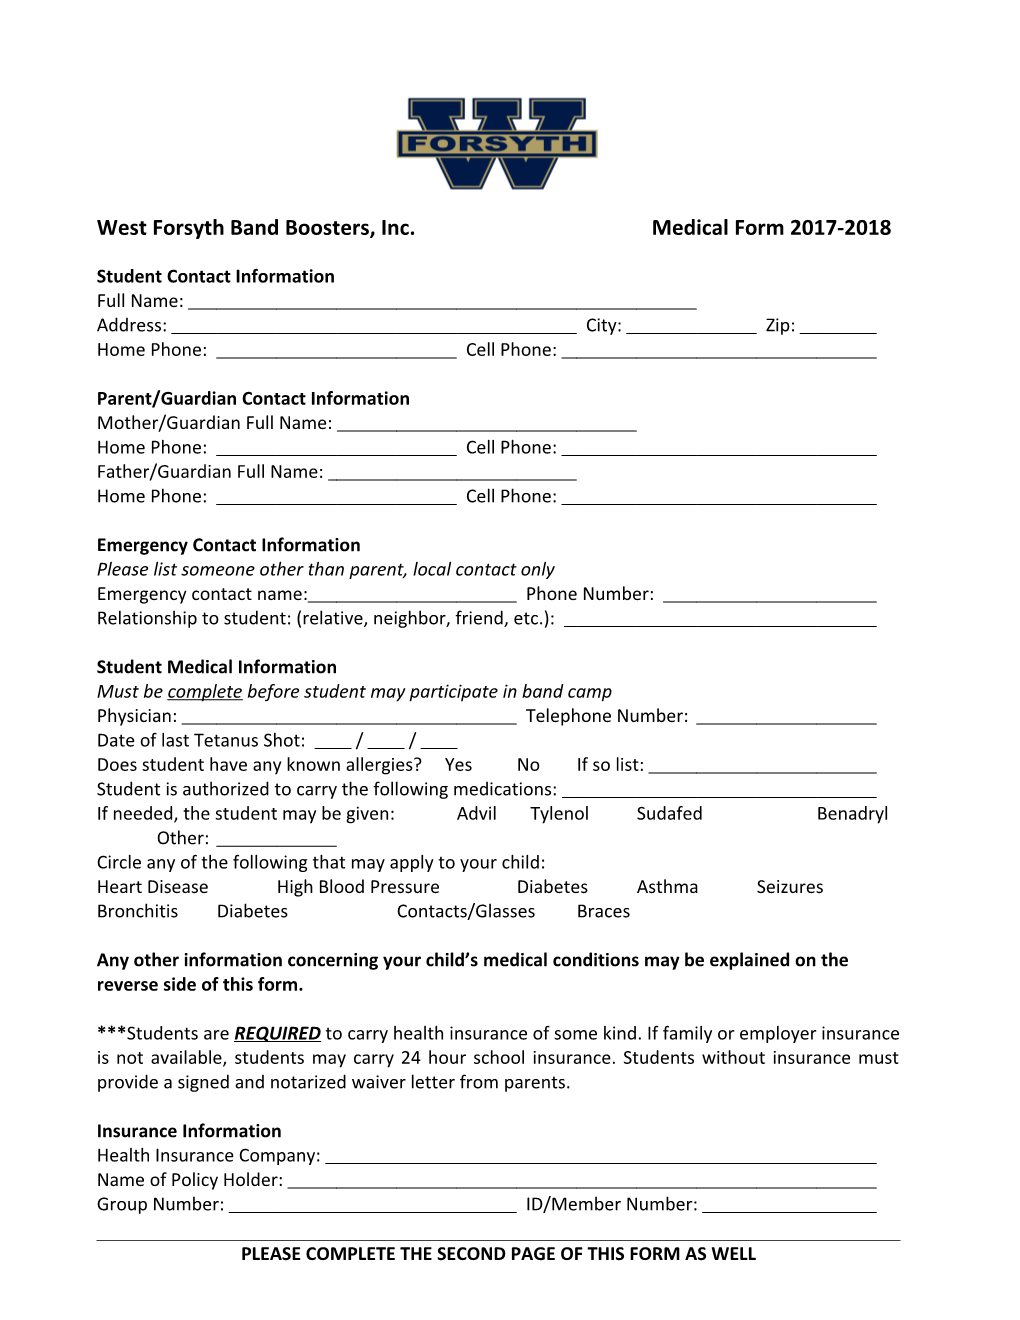 West Forsyth Band Boosters, Inc. Medical Form 2017-2018